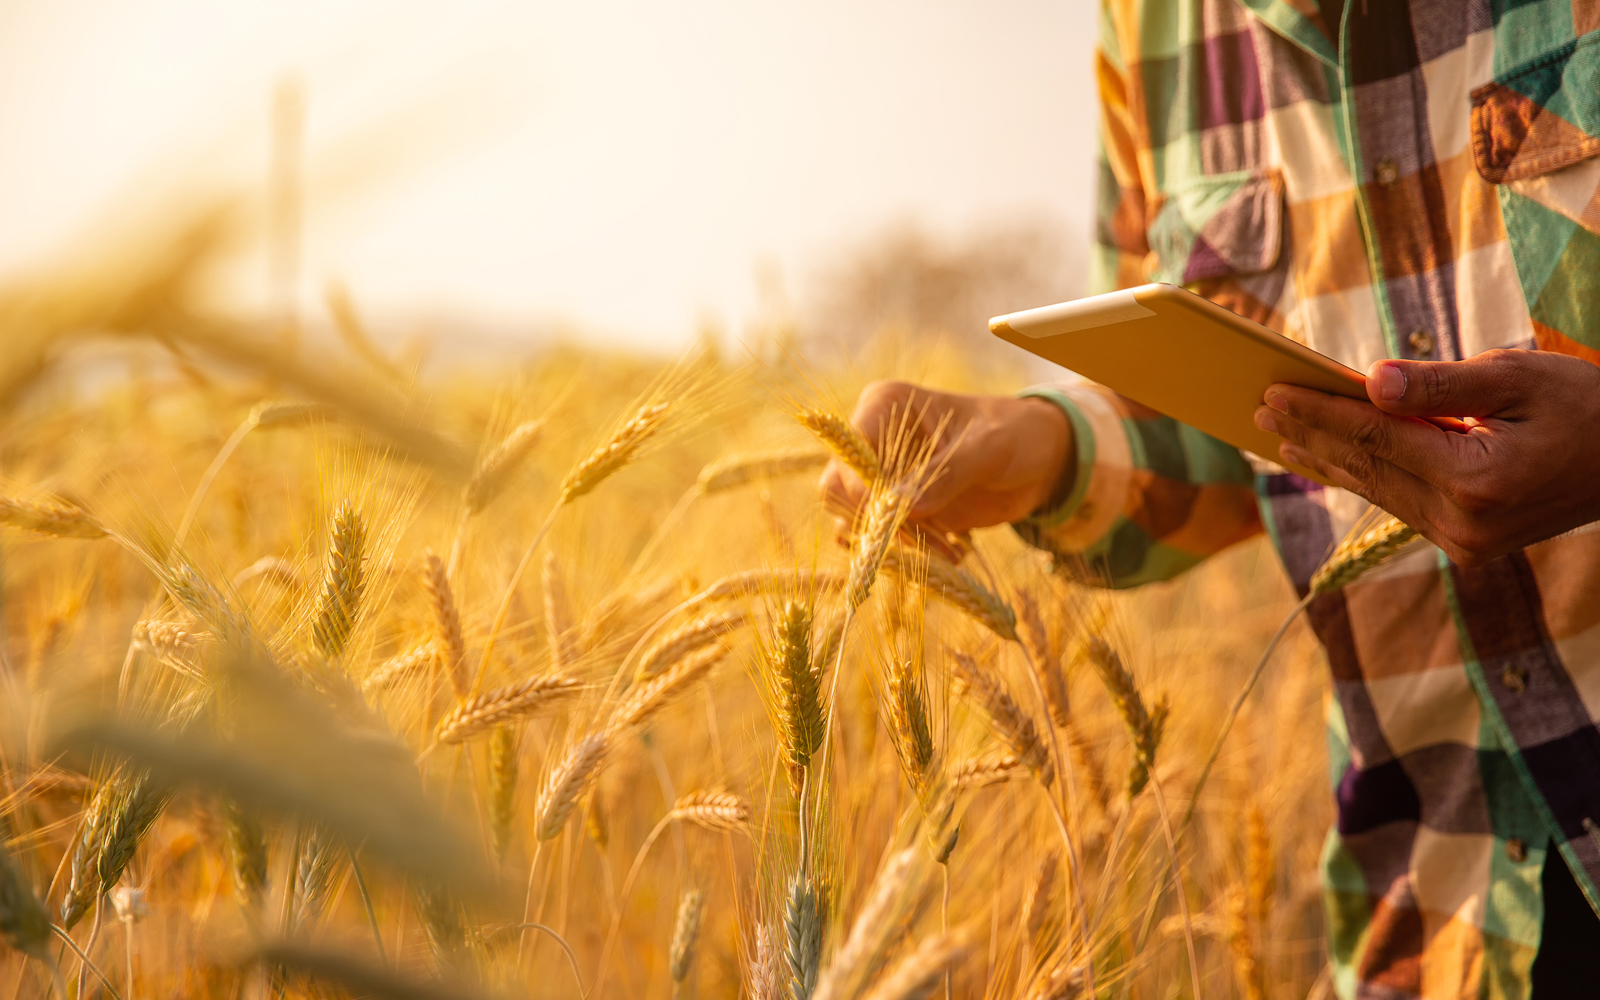 A man doing research on a tablet while walking through wheat field.